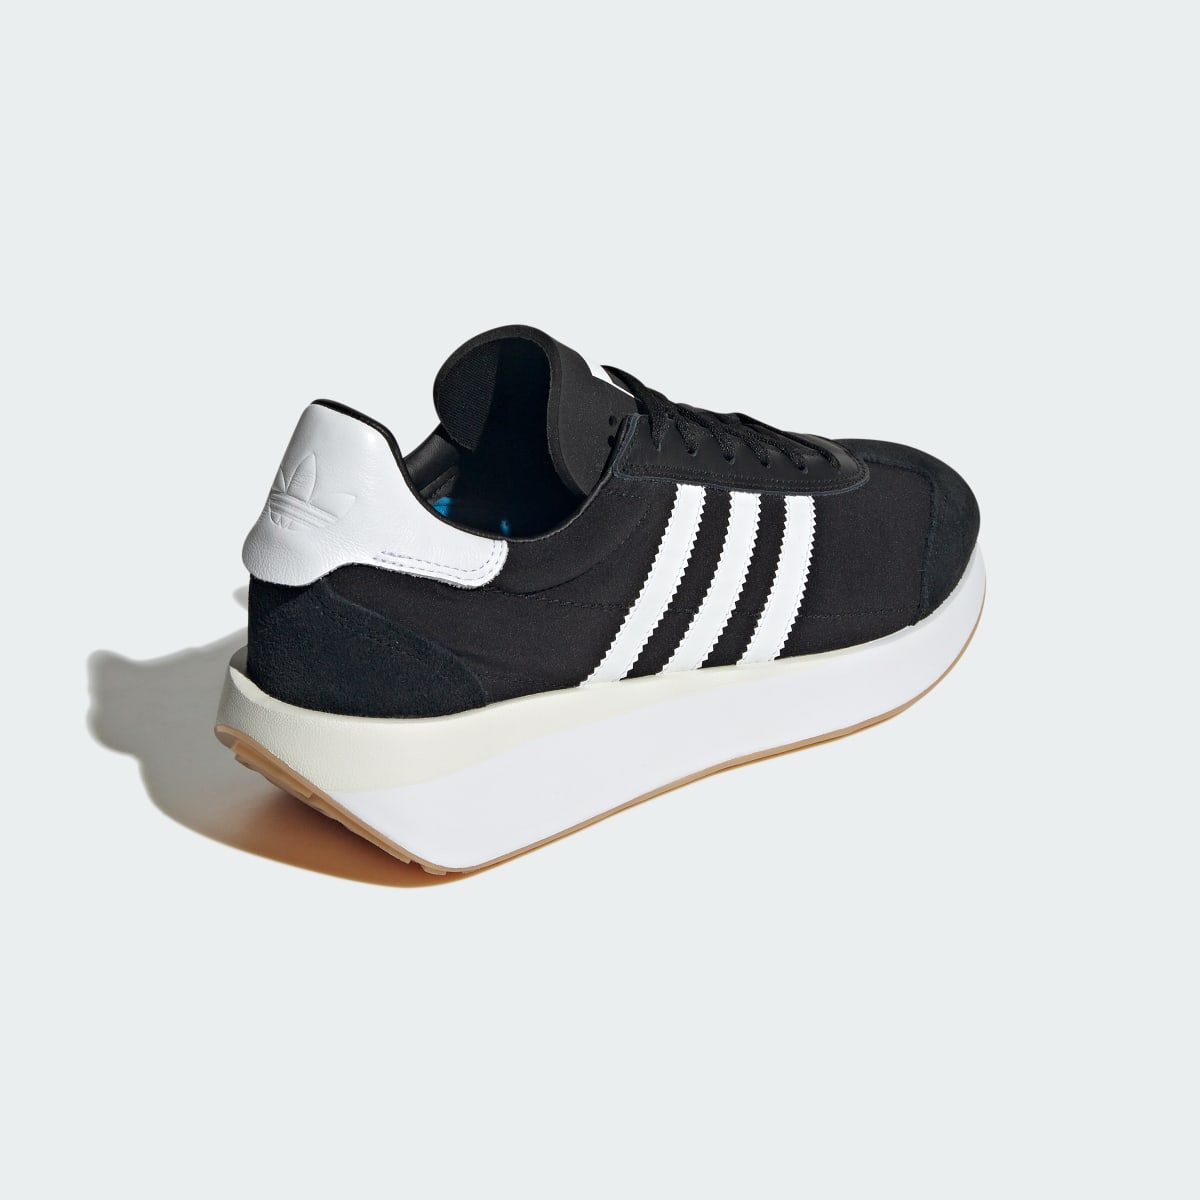 Adidas Country XLG Schuh. 5